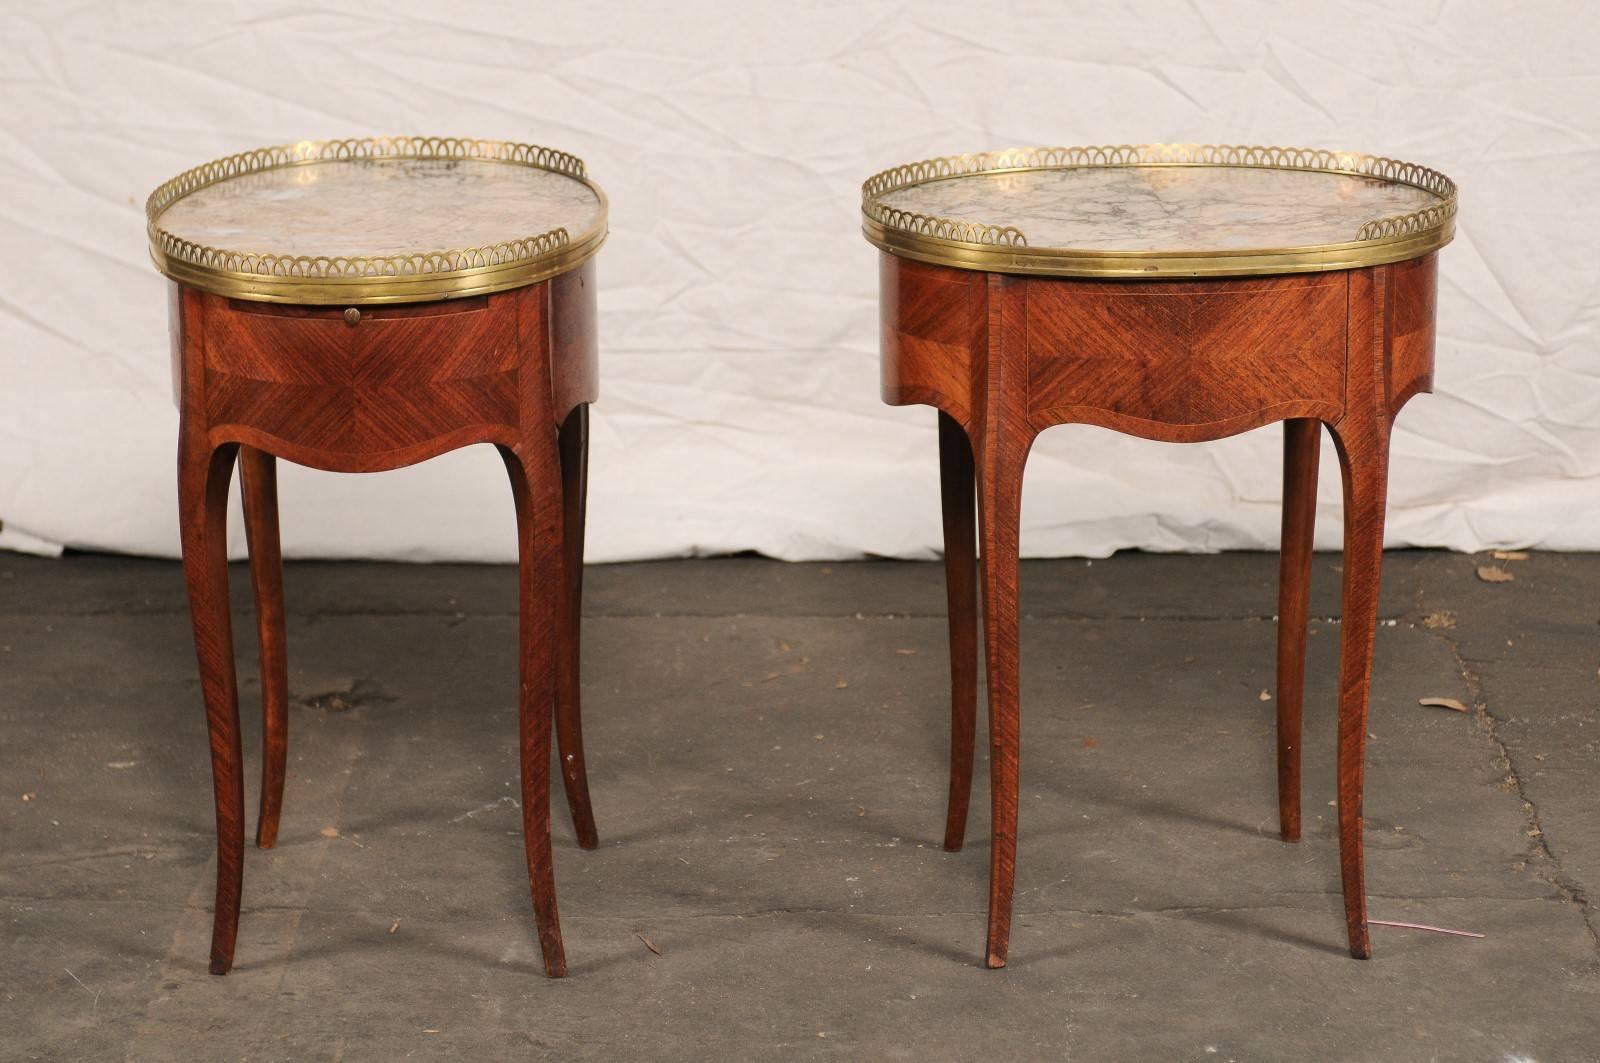 Pair of circa 1900 French Marble-Top, Bronze Gallery Tables with Drawers 5